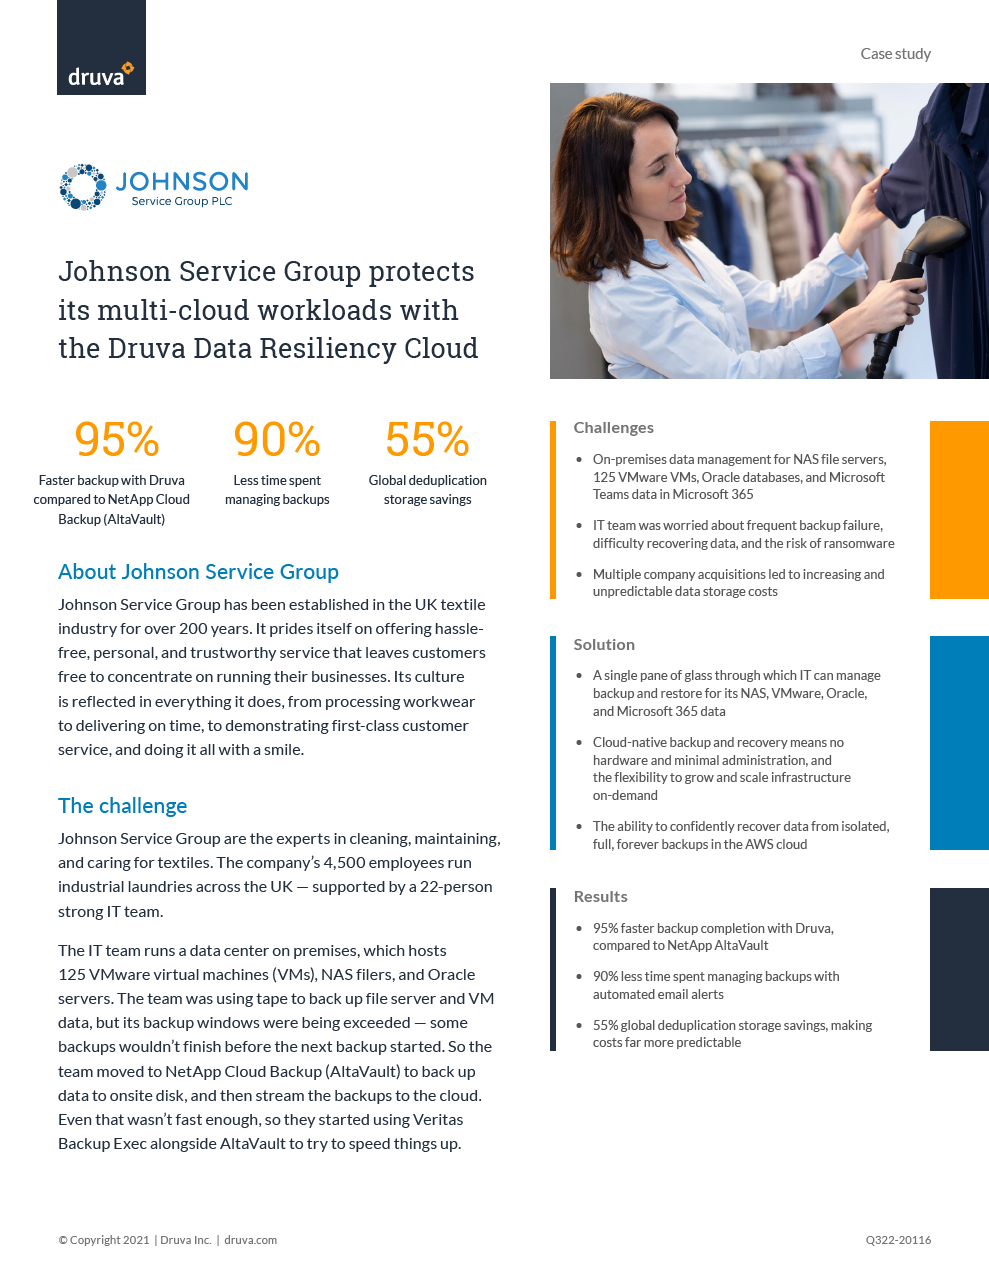 Johnson Service Group protects its multi-cloud workloads with the Druva Data Resiliency Cloud